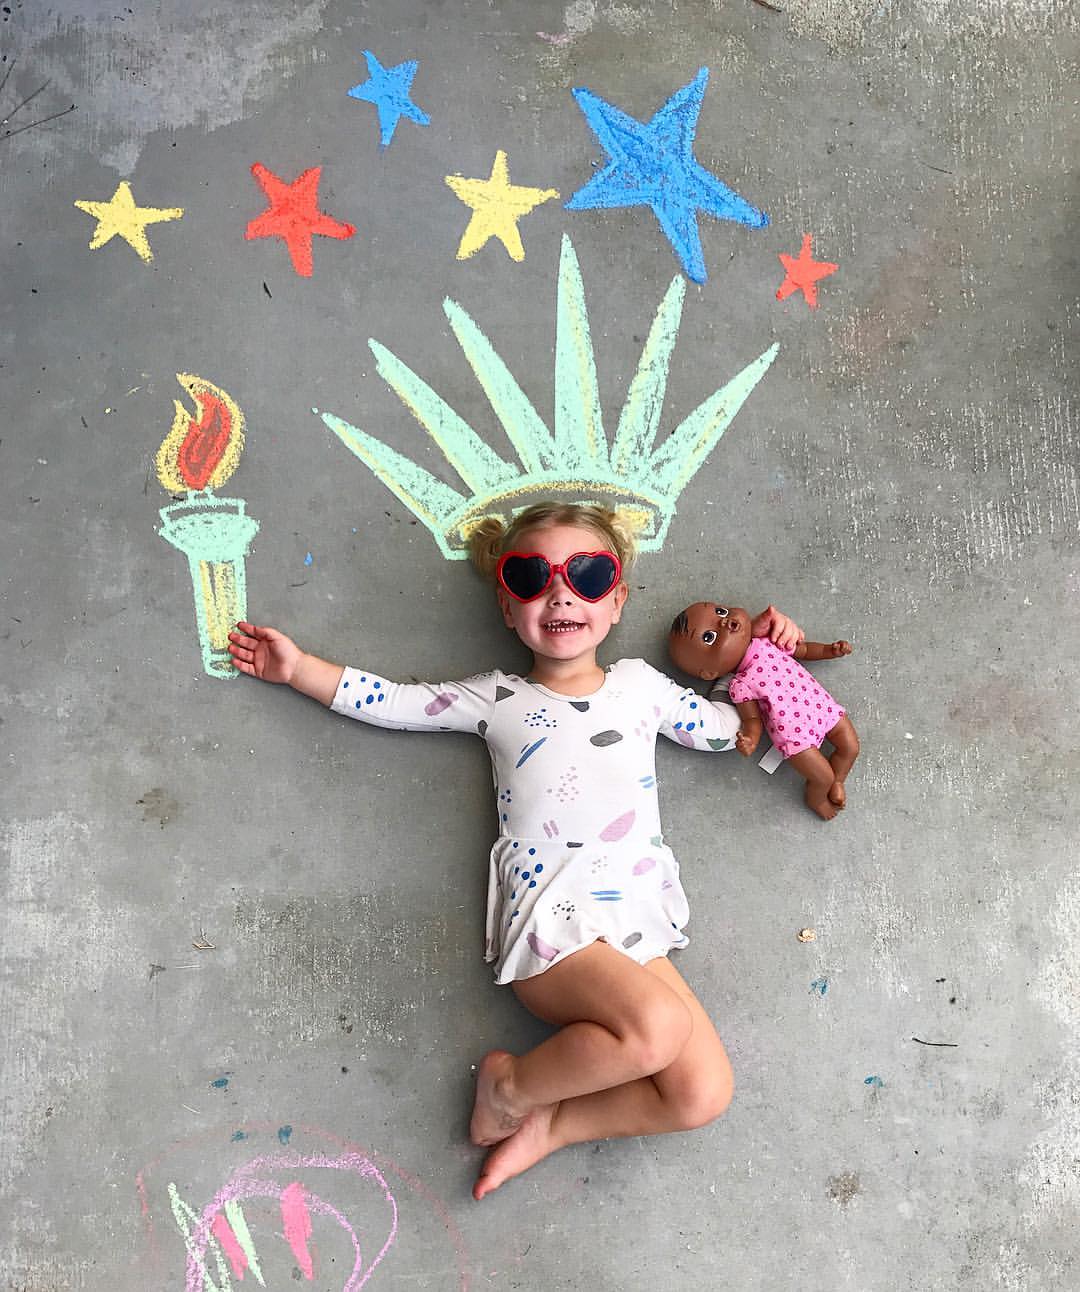  sidewalk chalk pictures of girl posing as the statue of liberty